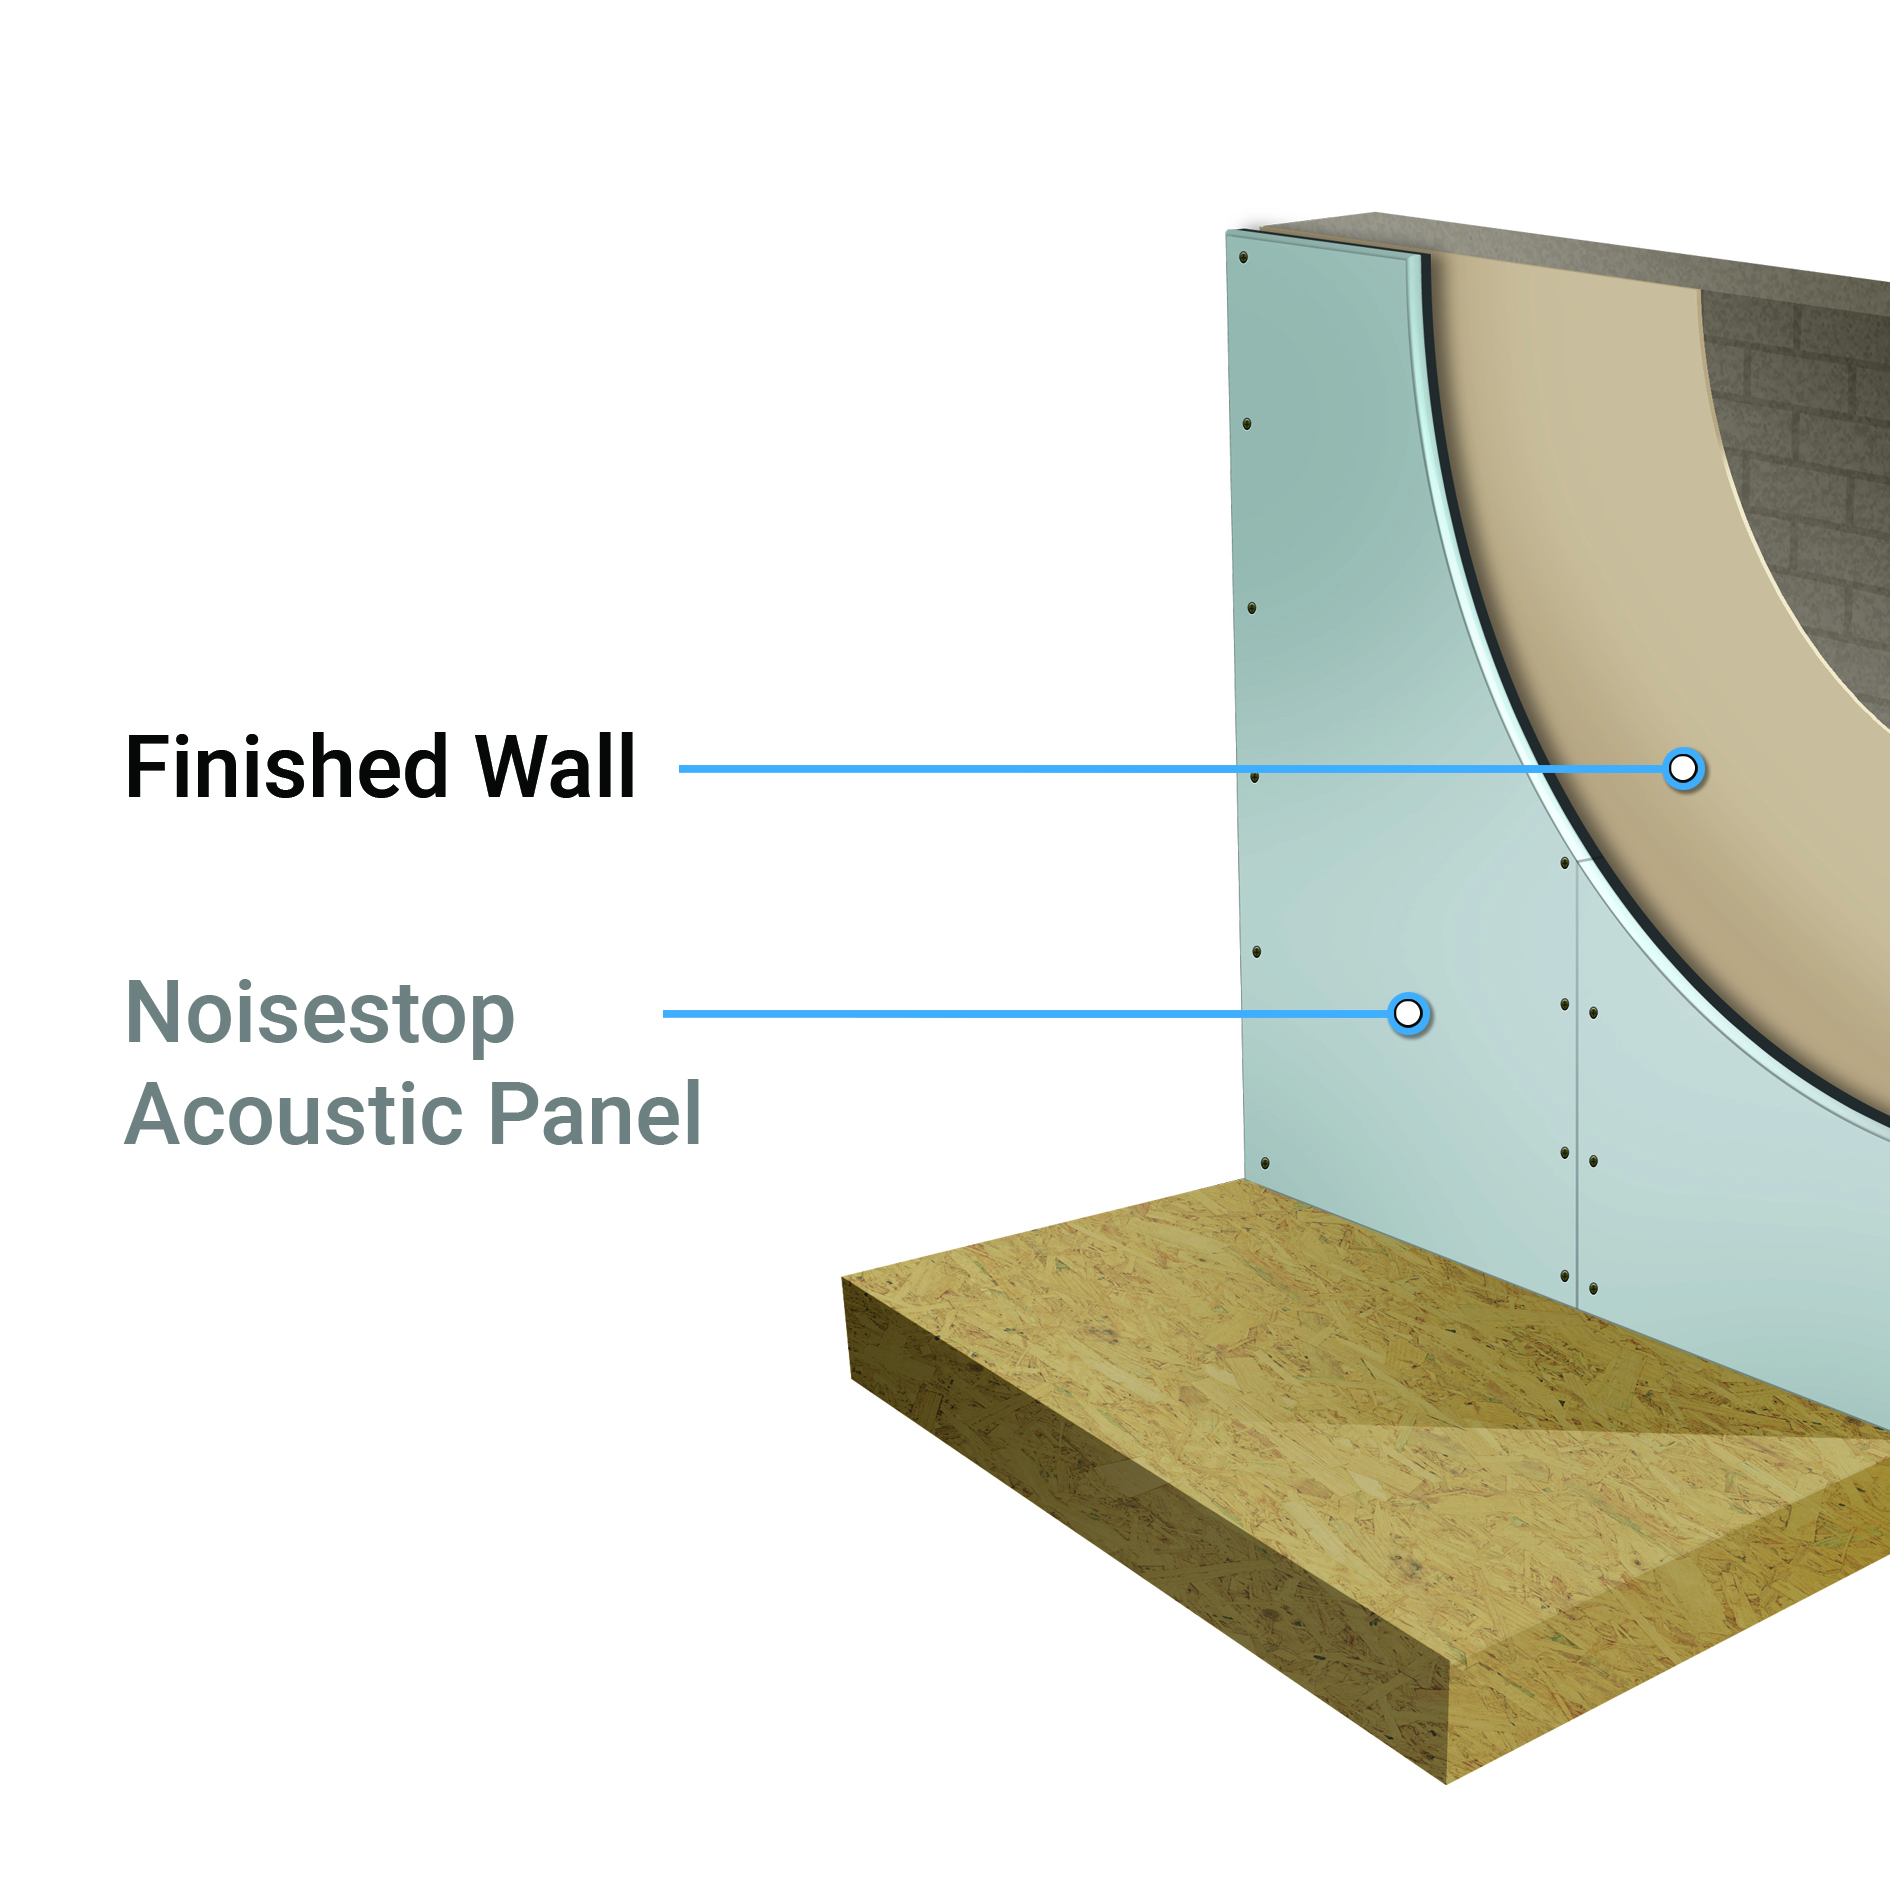 Noisestop Acoustic Panel onto a finished wall